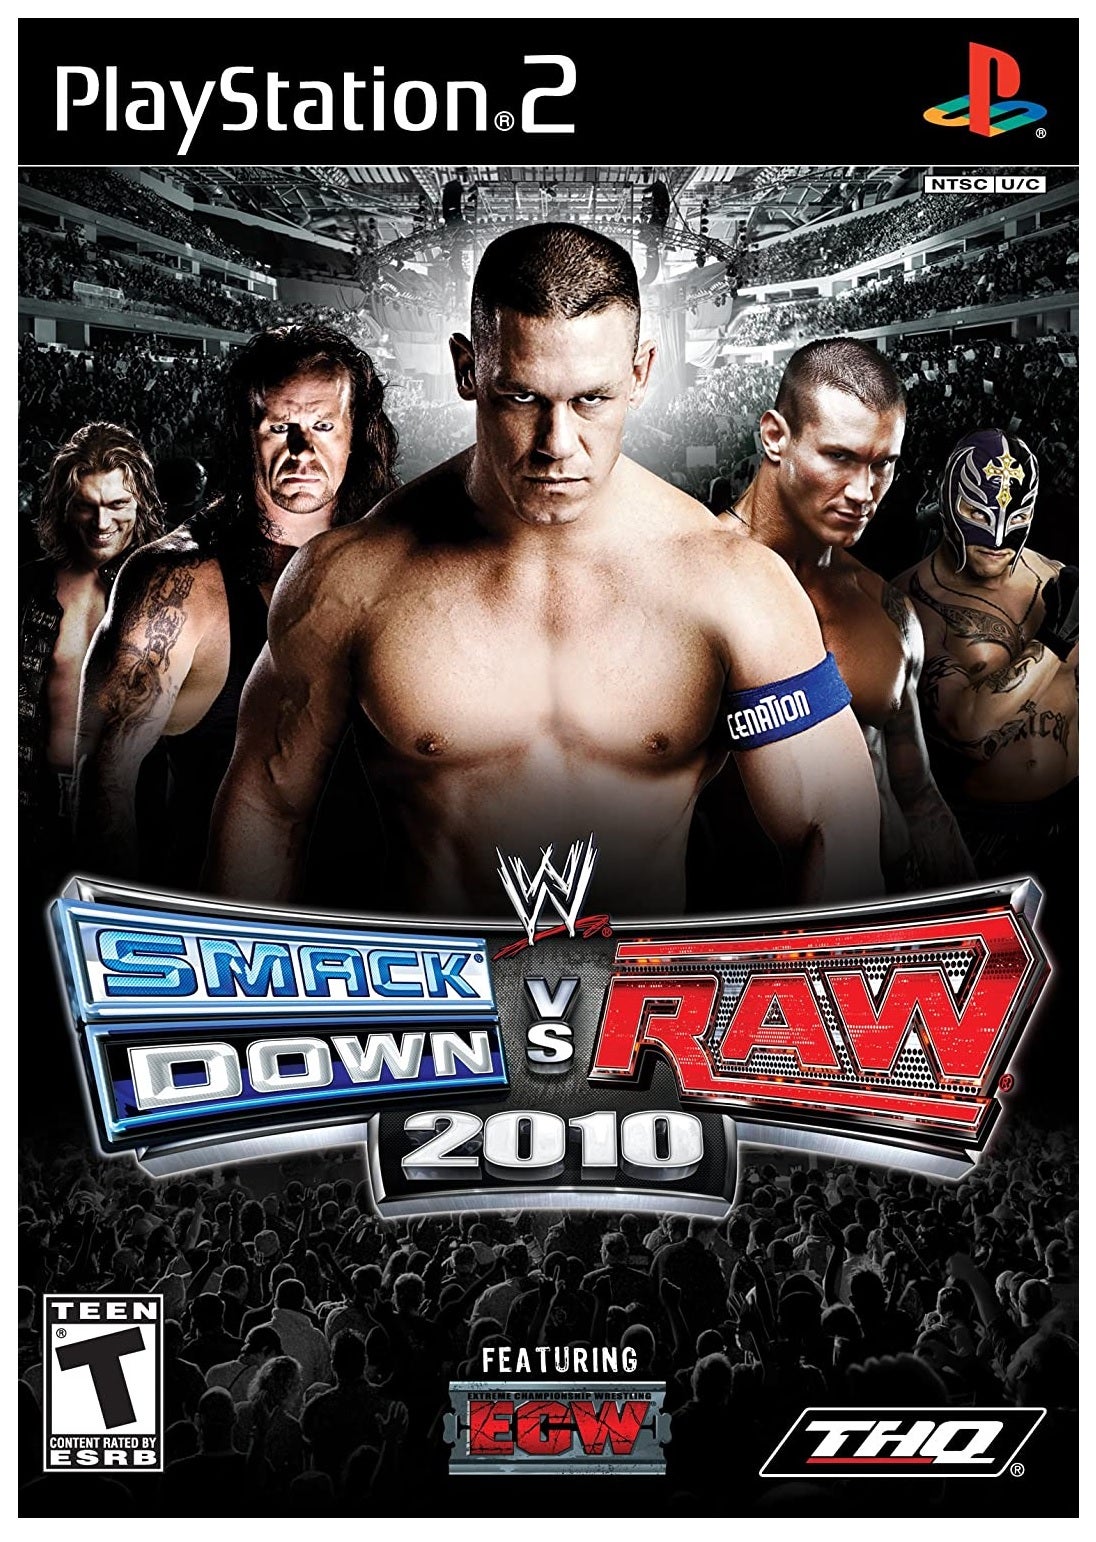 THQ WWE Smackdown Vs Raw 2010 Refurbished PS2 Playstation 2 Game